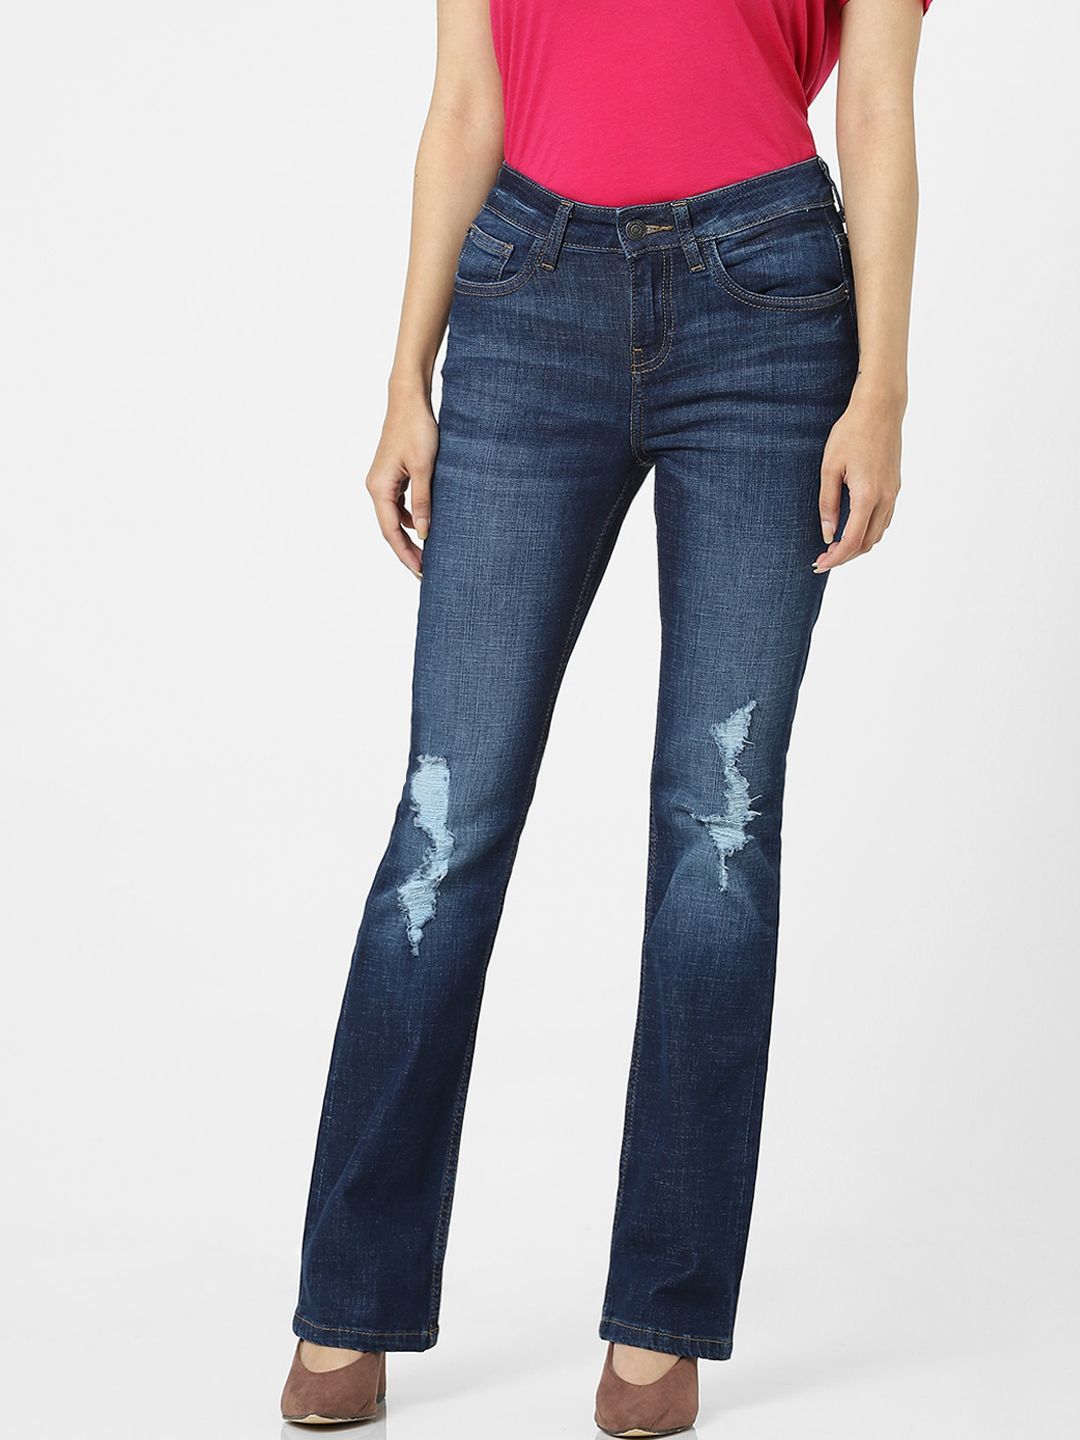 Vero Moda Women Blue Bootcut Mildly Distressed Light Fade Jeans Price in India